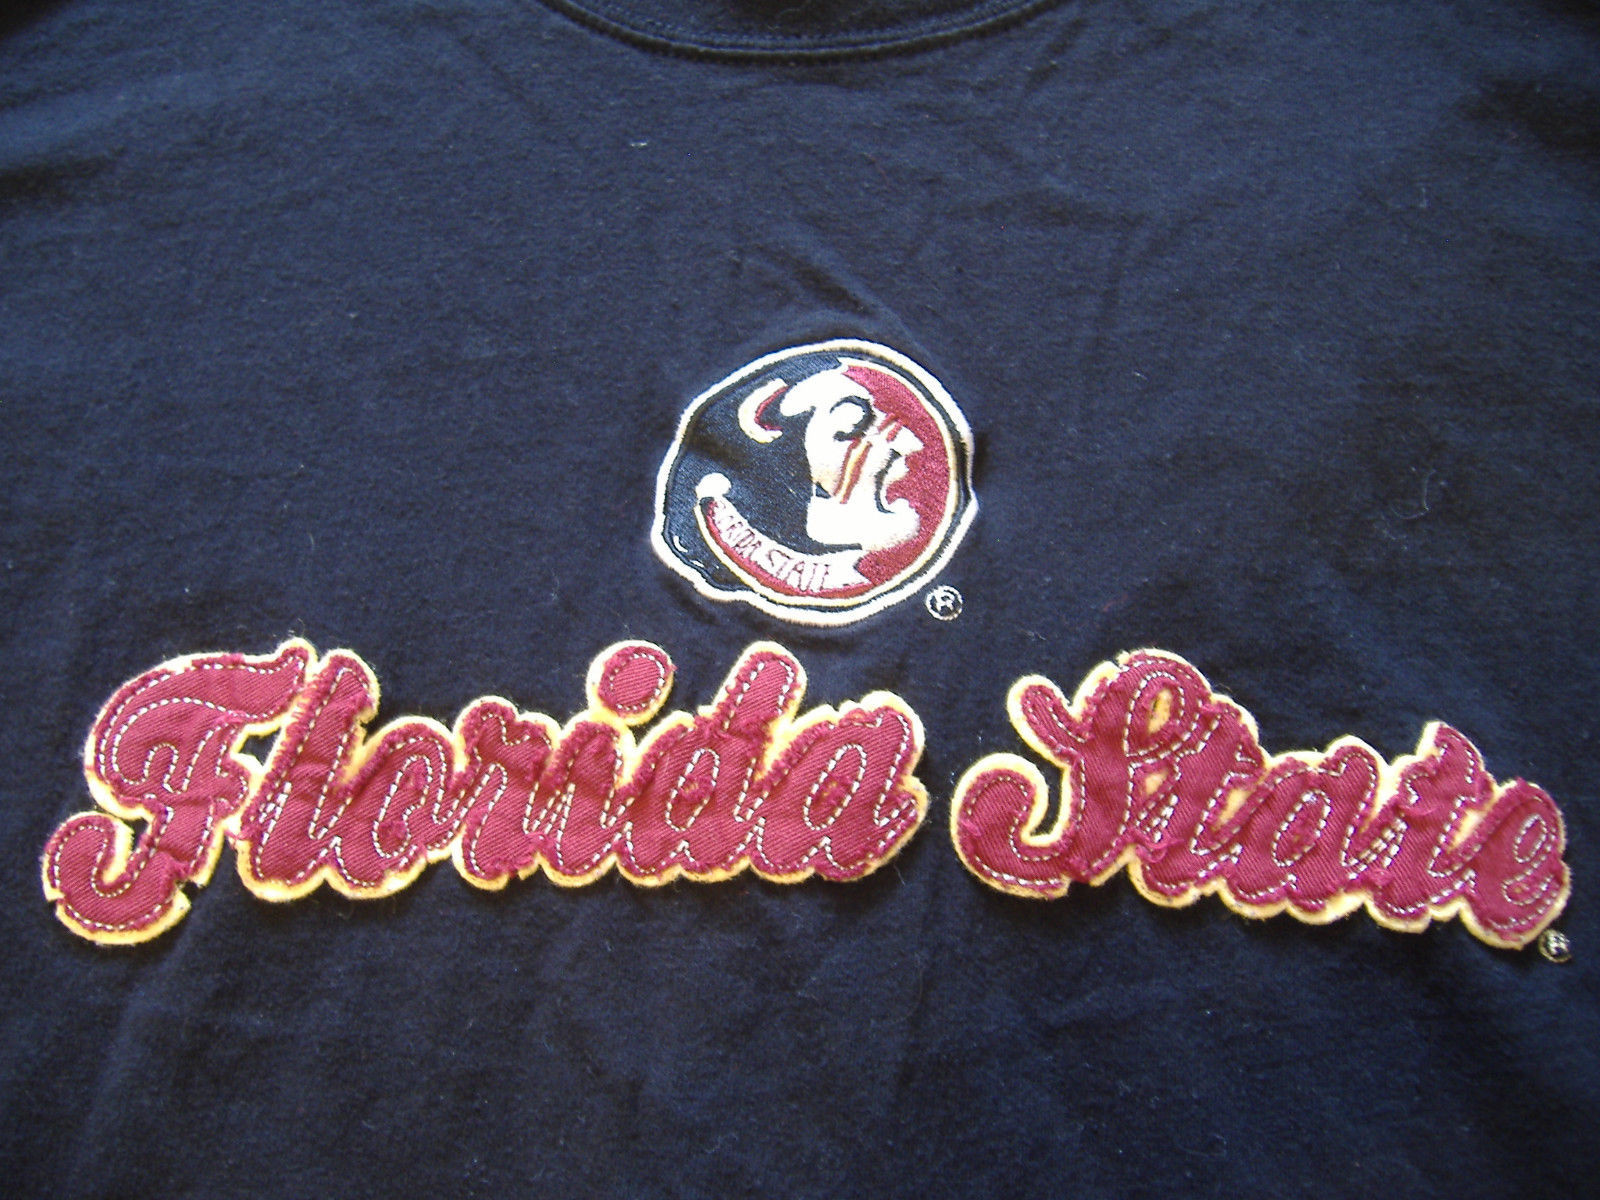 Primary image for NCAA Florida State University (FSU) Seminoles Brown Graphic T-Shirt - Size N/A